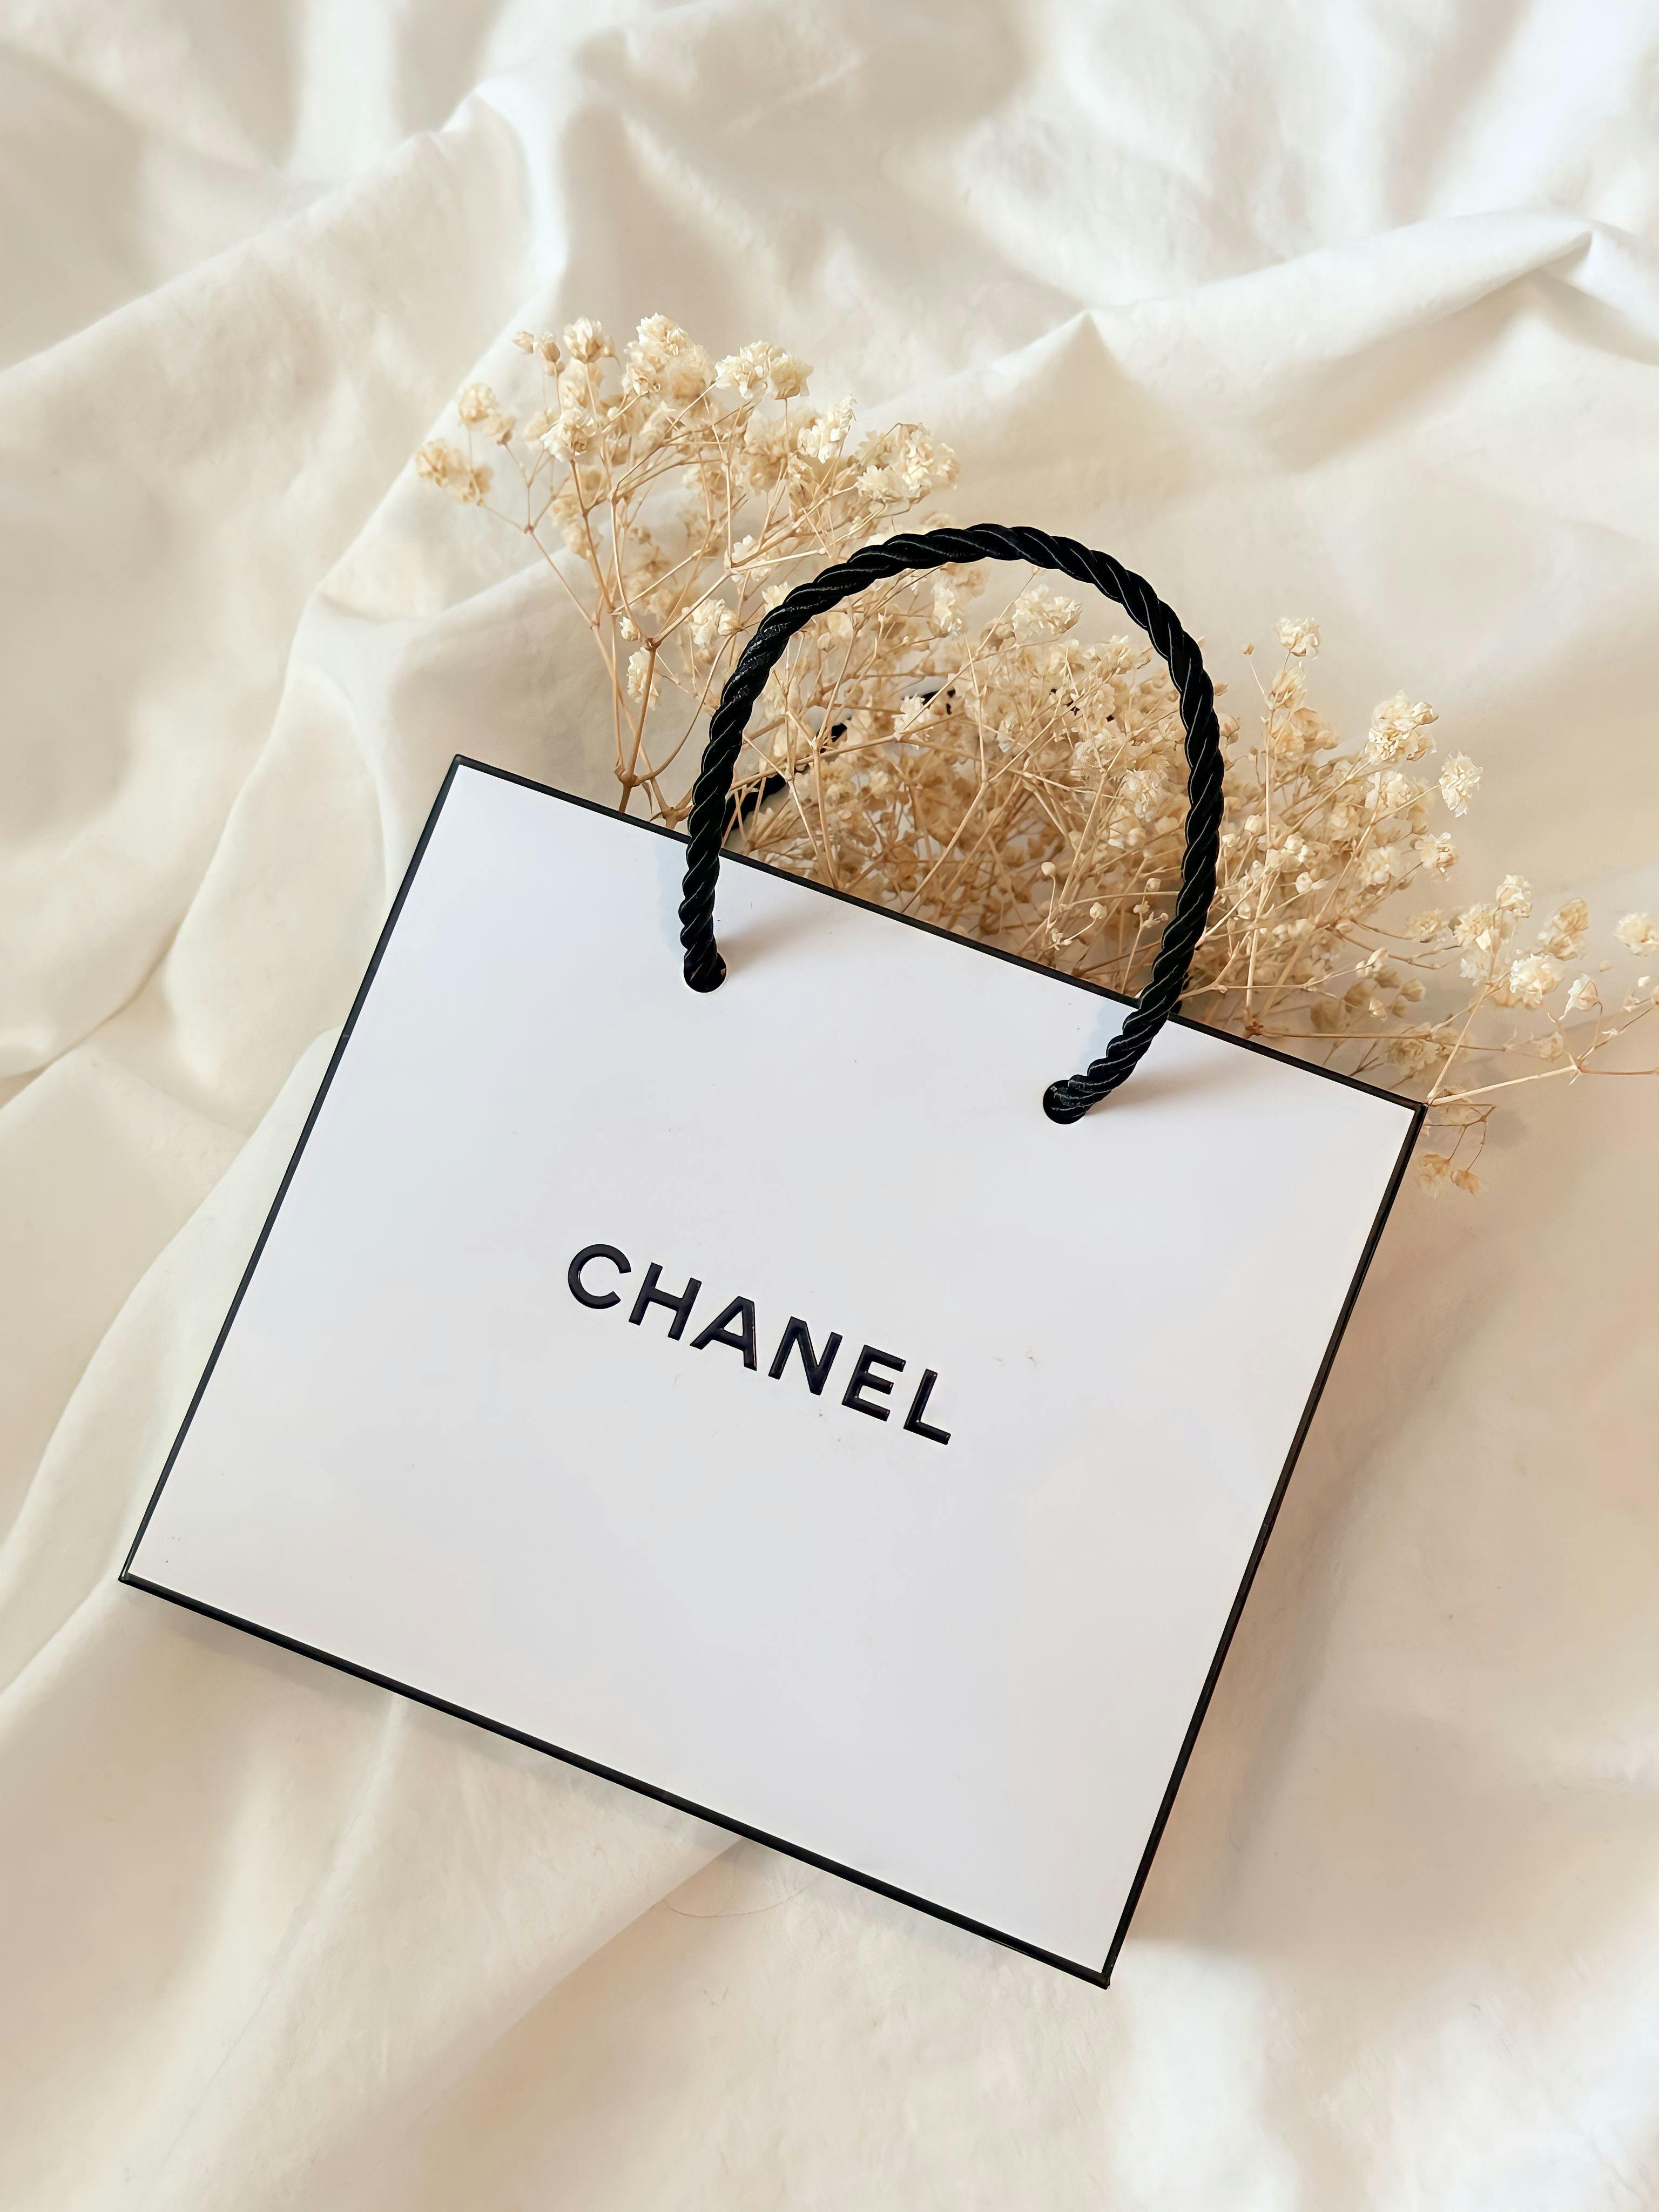 Gold Link Chanel Bag Pictures Photos and Images for Facebook Tumblr  Pinterest and Twitter